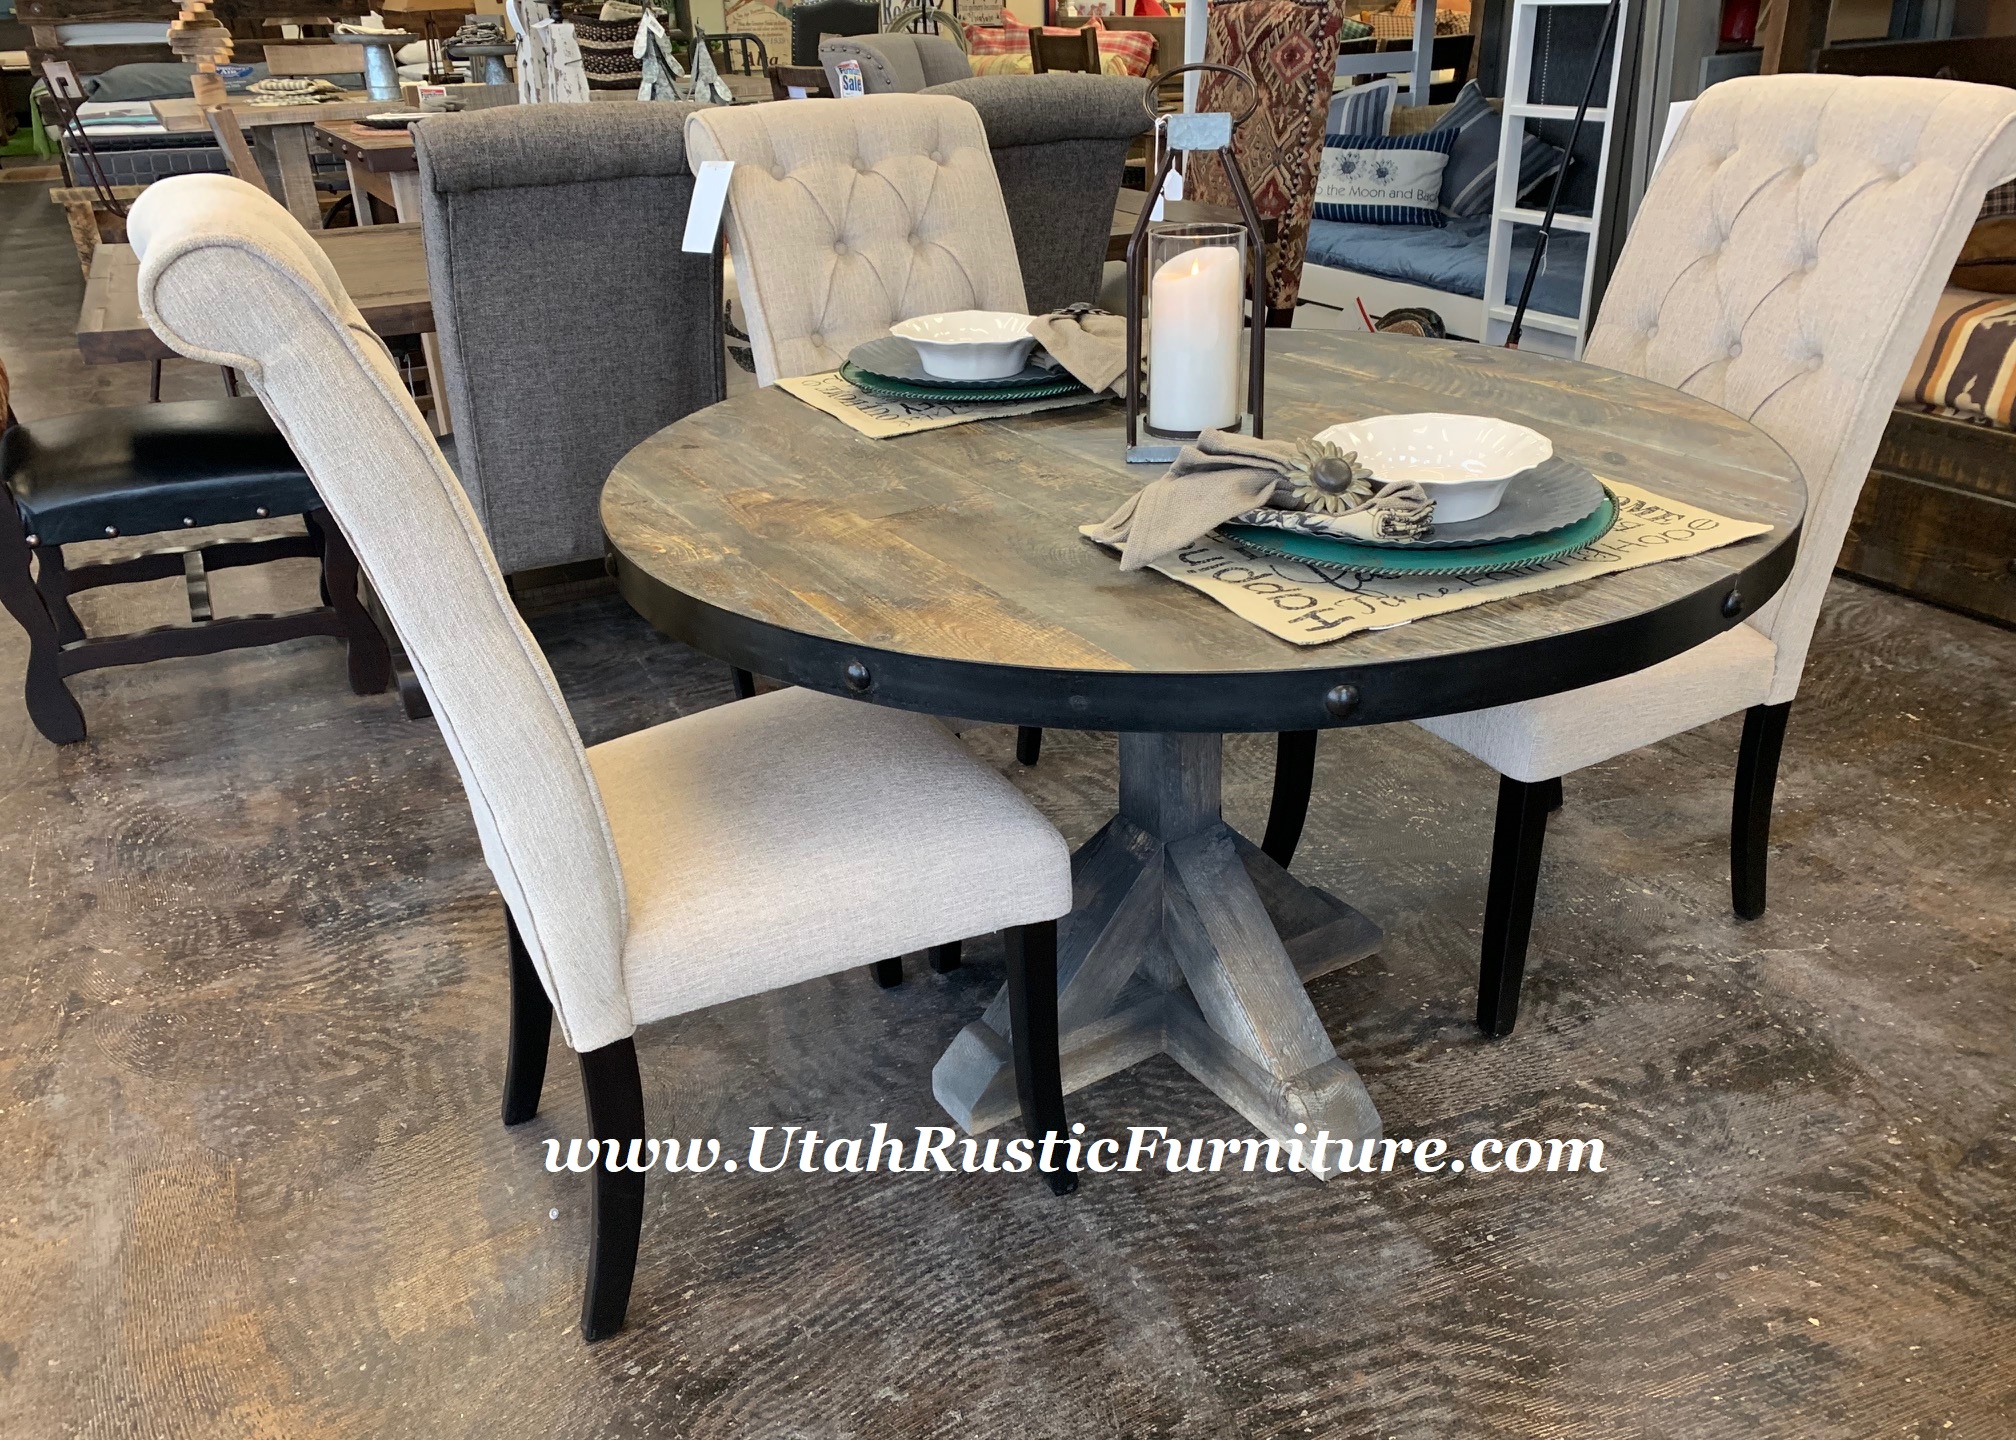 Utah Rustic Dining Table Sets, Rustic Solid Wood Large Round Dining Table Chair Set